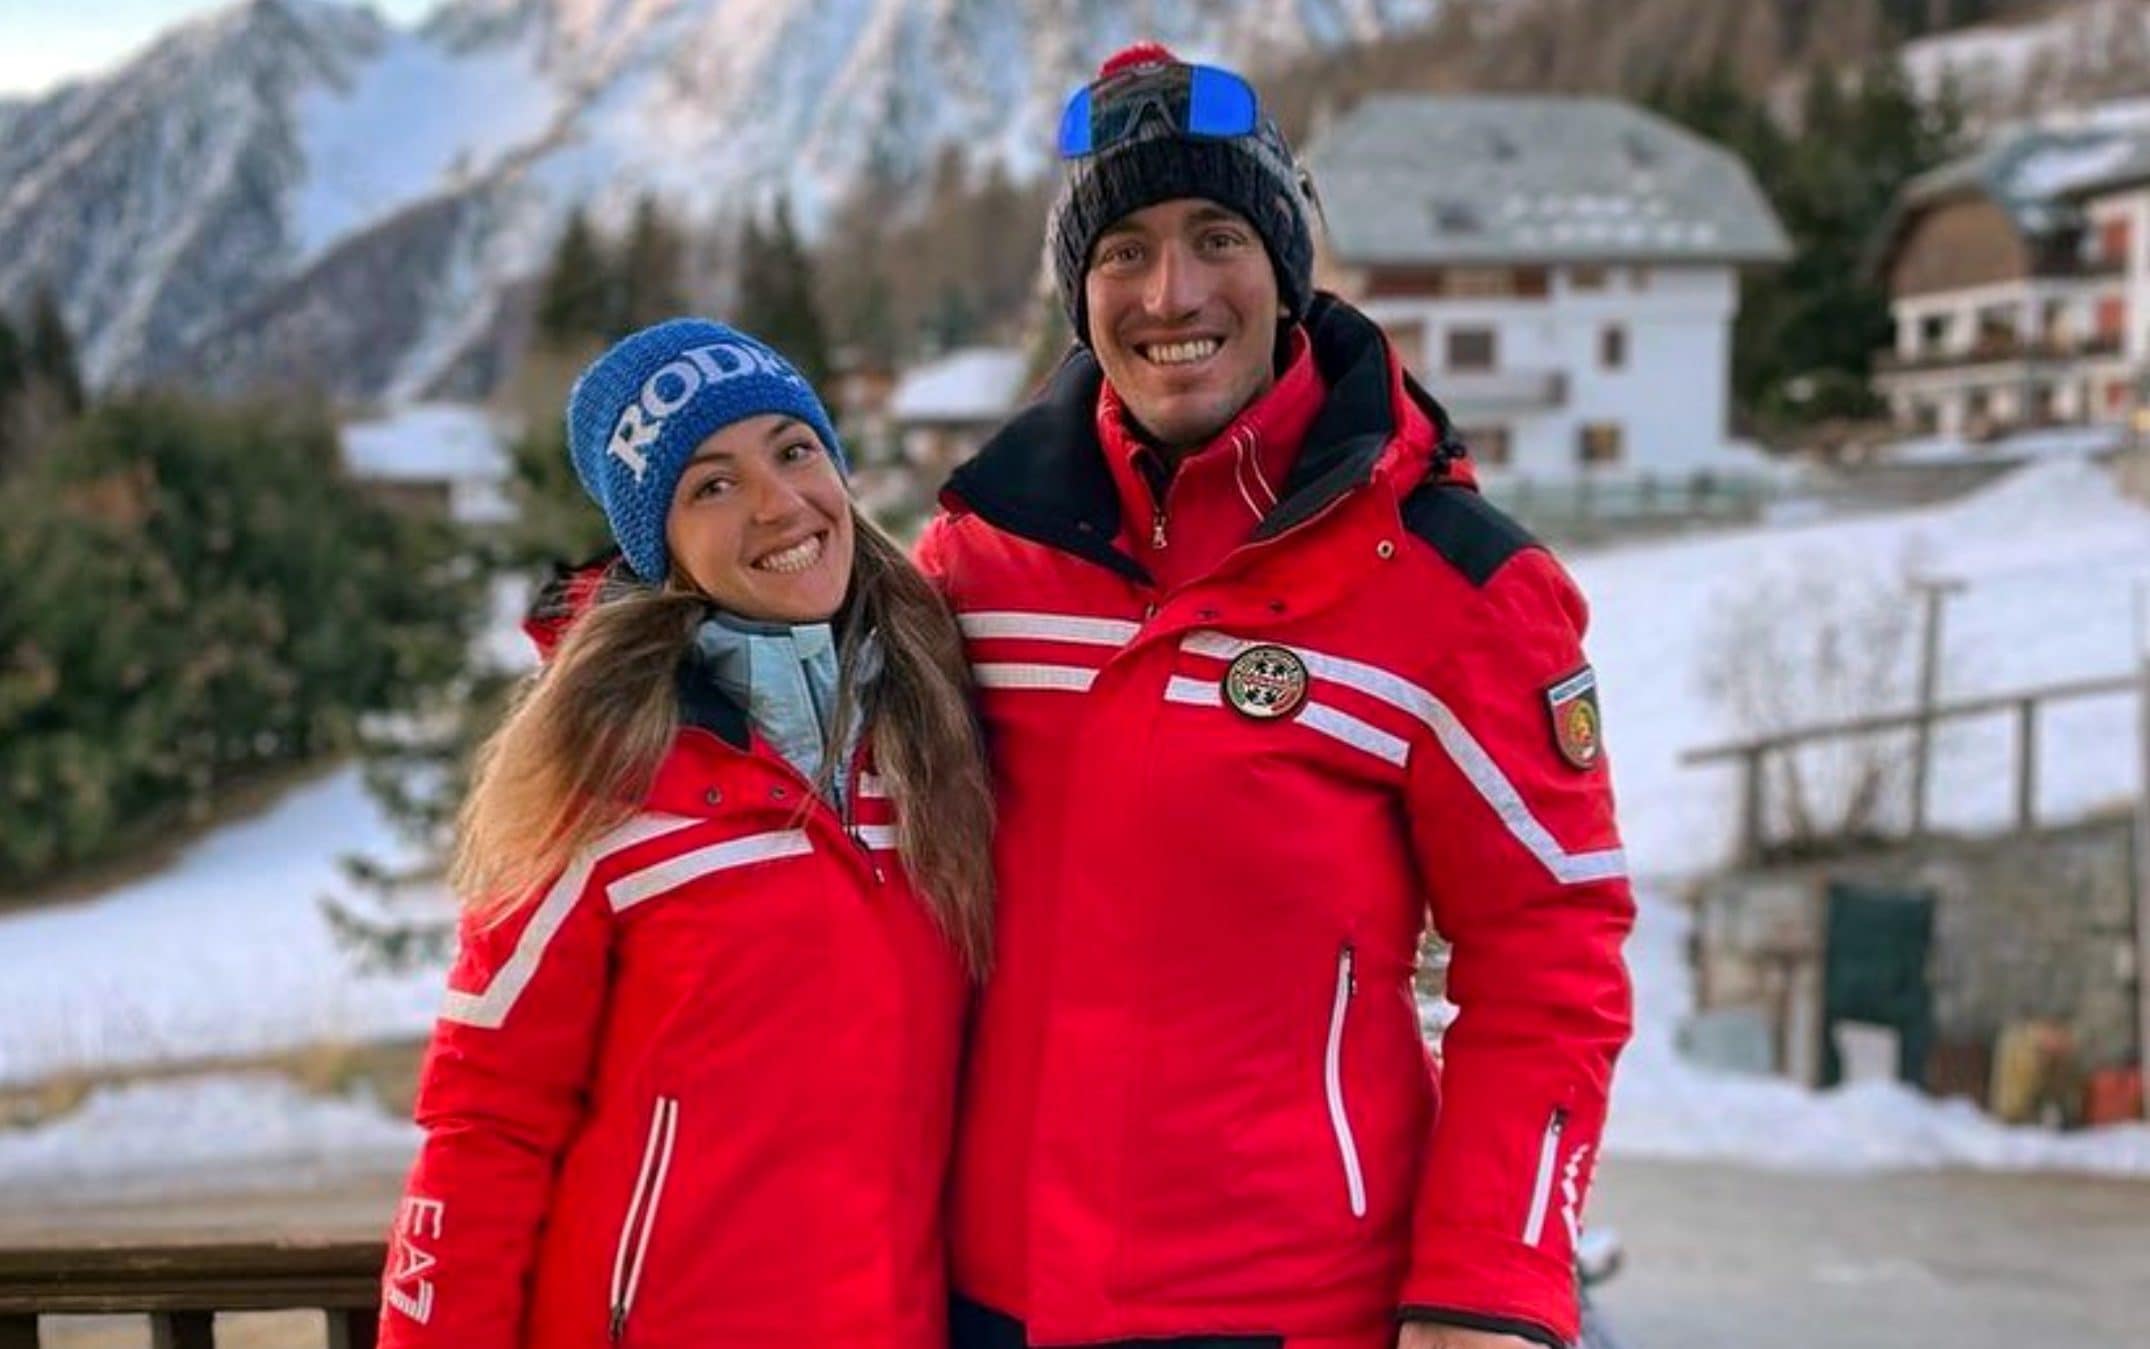 World Cup skier Jean Daniel Pession dies with girlfriend after 2,300ft fall off mountain